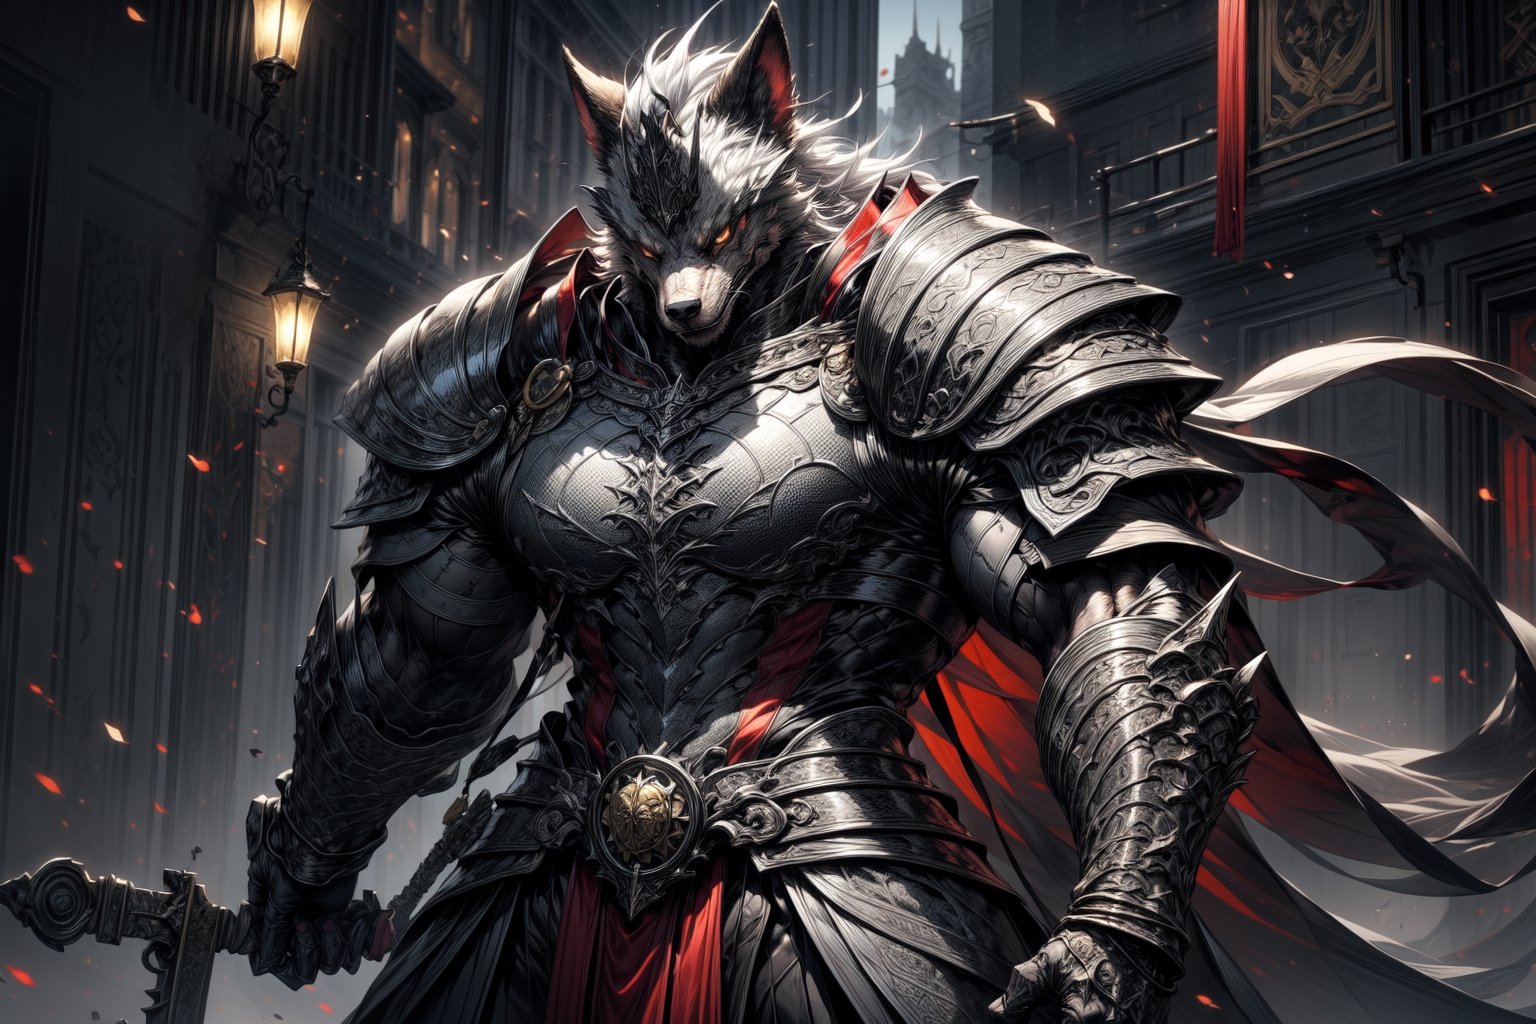 A character design concept for a medieval-themed fantasy world featuring magic. The protagonist is a 28-year-old werewolf with grey-white fur and sharp, golden eyes. Adorned in leather armor with intricate designs and emblems, they possess a muscular and imposing physique. Positioned centrally, surrounded by depictions of weaponry, attributes, skills, magic, and related items in a fictional language. The artwork is presented in ultra-high definition, depicting a fantastical w